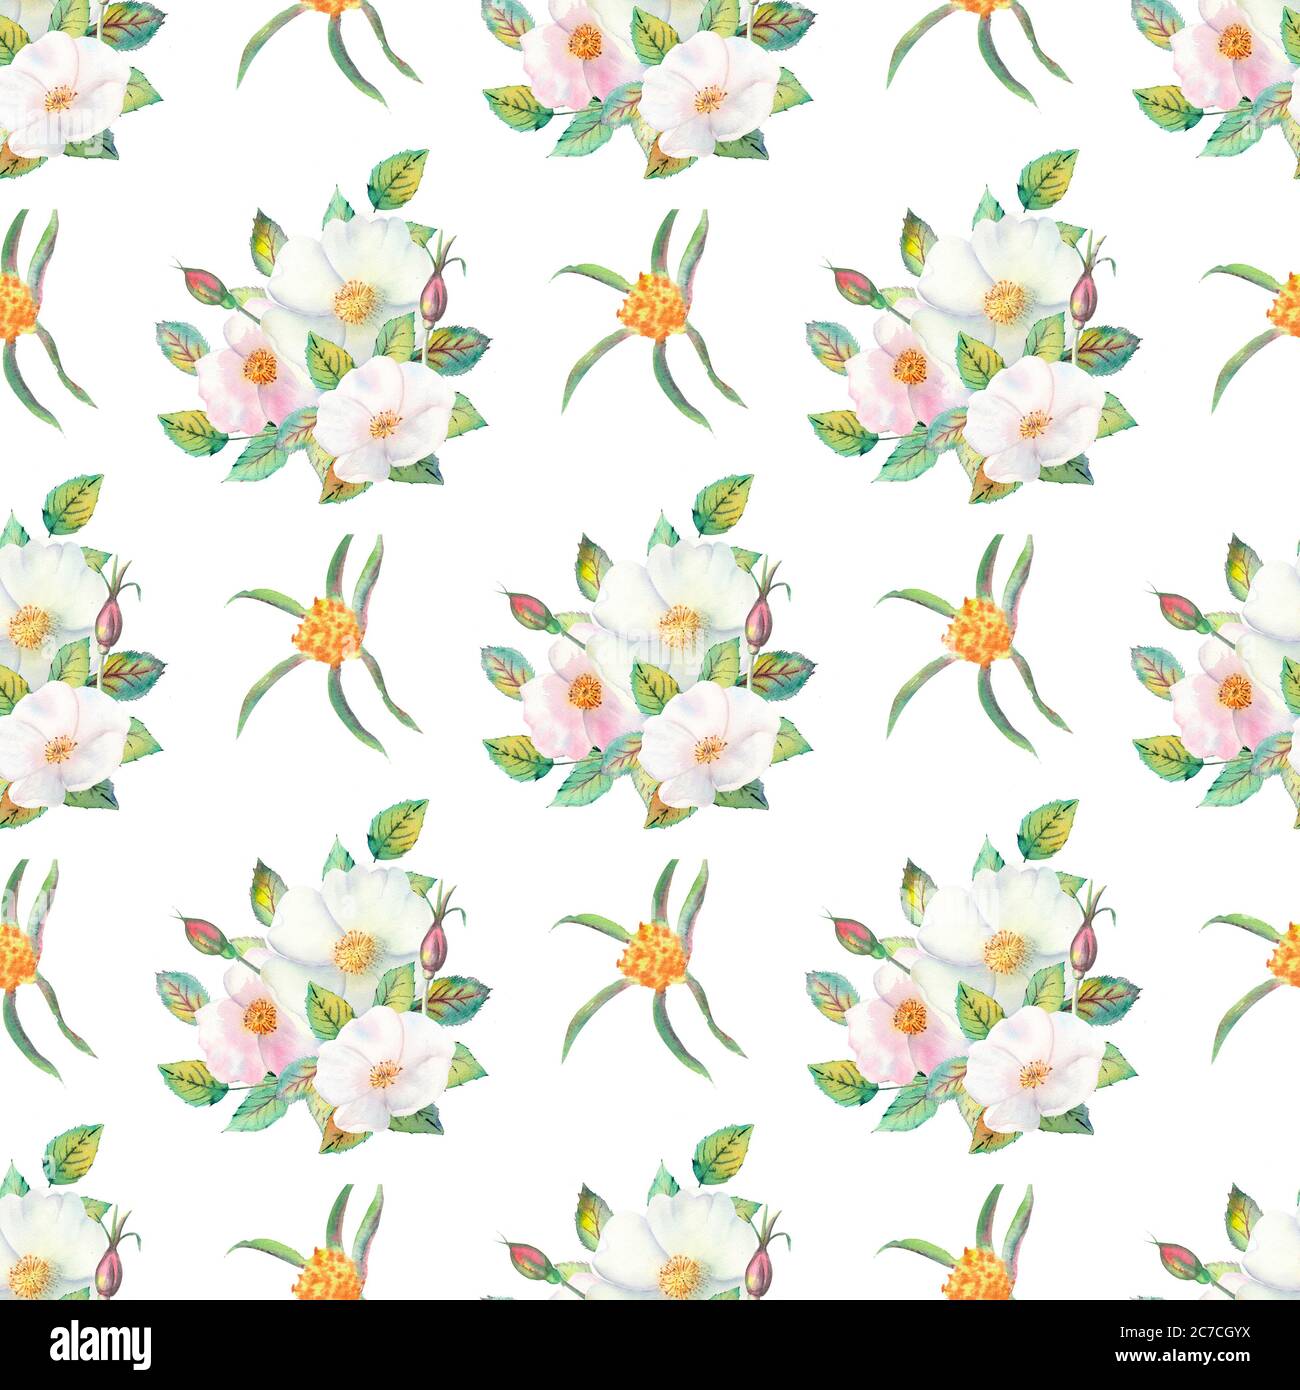 Seamless pattern. Flowers and fruits of rose hips Watercolor. Flower illustrations. Bohemian bouquets of flowers, wreaths, wedding compositions Stock Photo